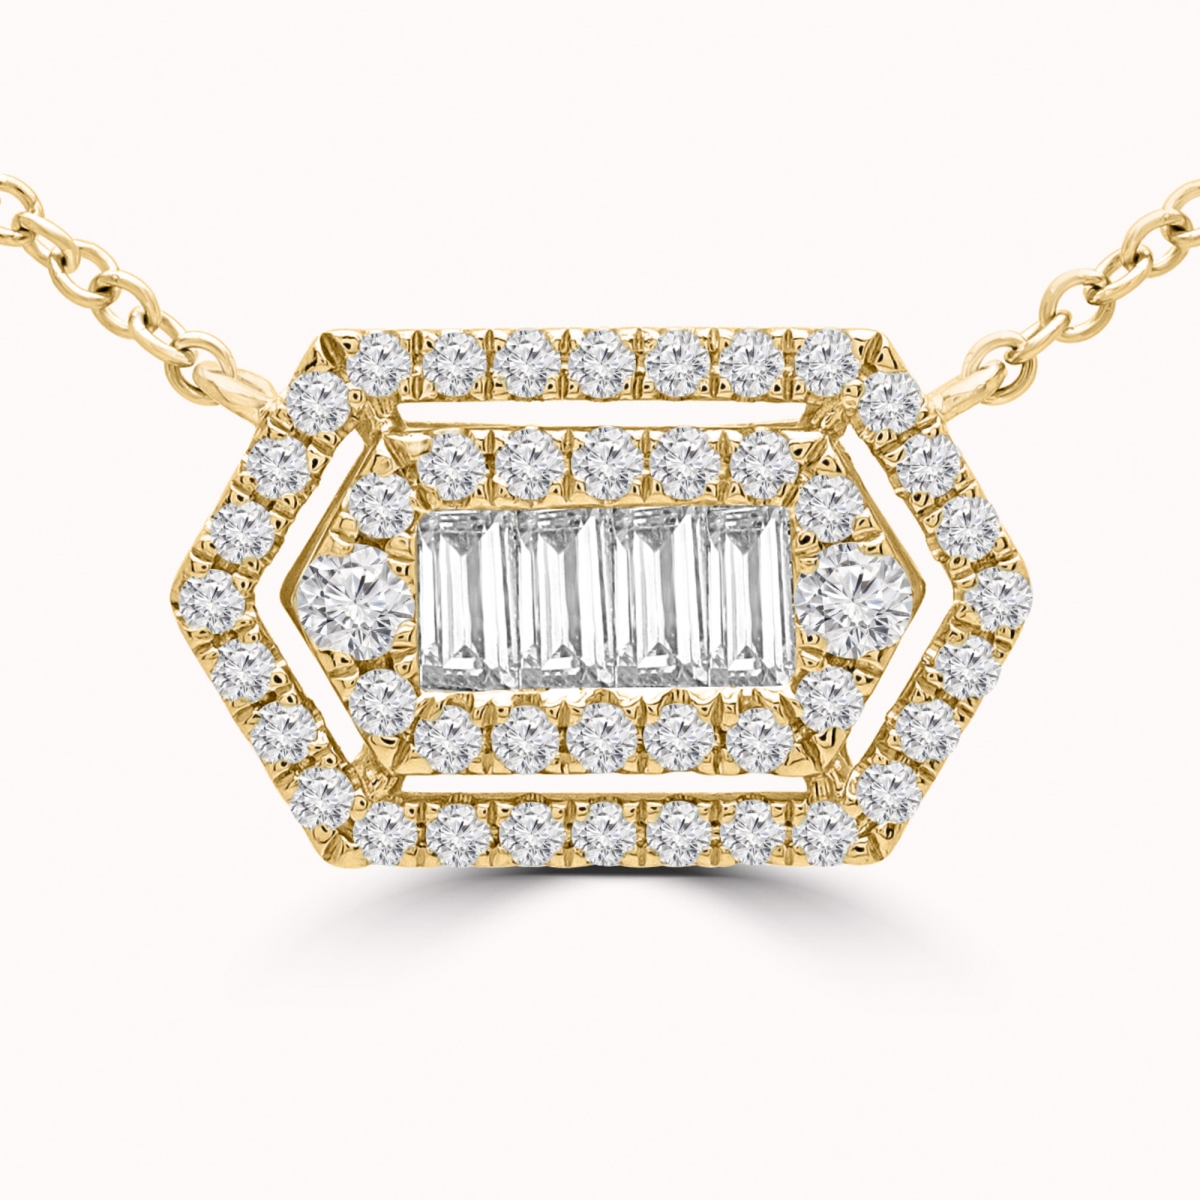 Md190298 0.67 Ctw Baguette Diamond Cluster Double Halo Necklace In 18k Yellow Gold